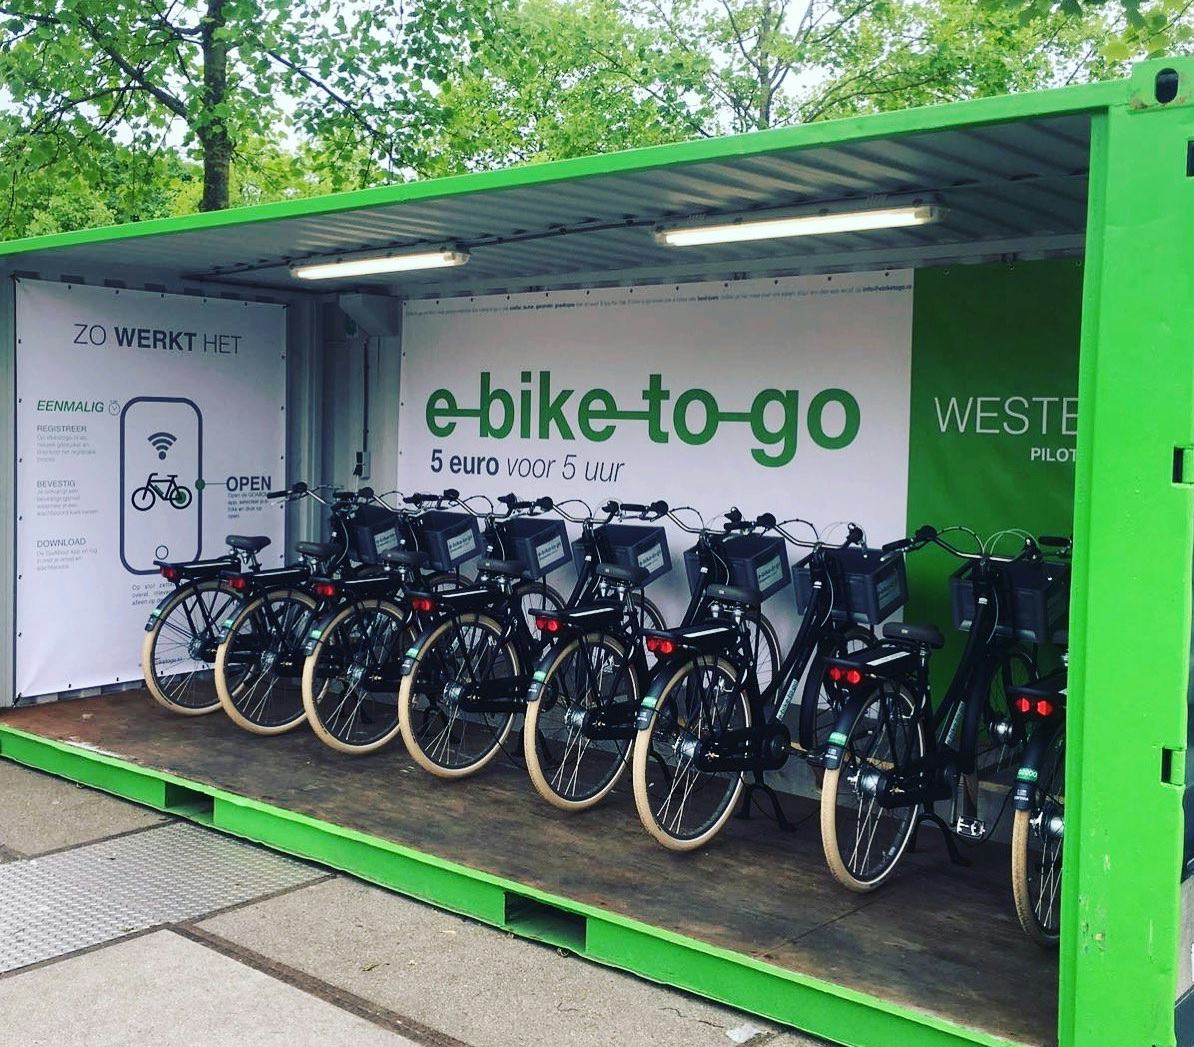 Sharing systems contribute to the growing usage of bicycles and e-bikes in the Netherlands. – Photo e-bike-to-go